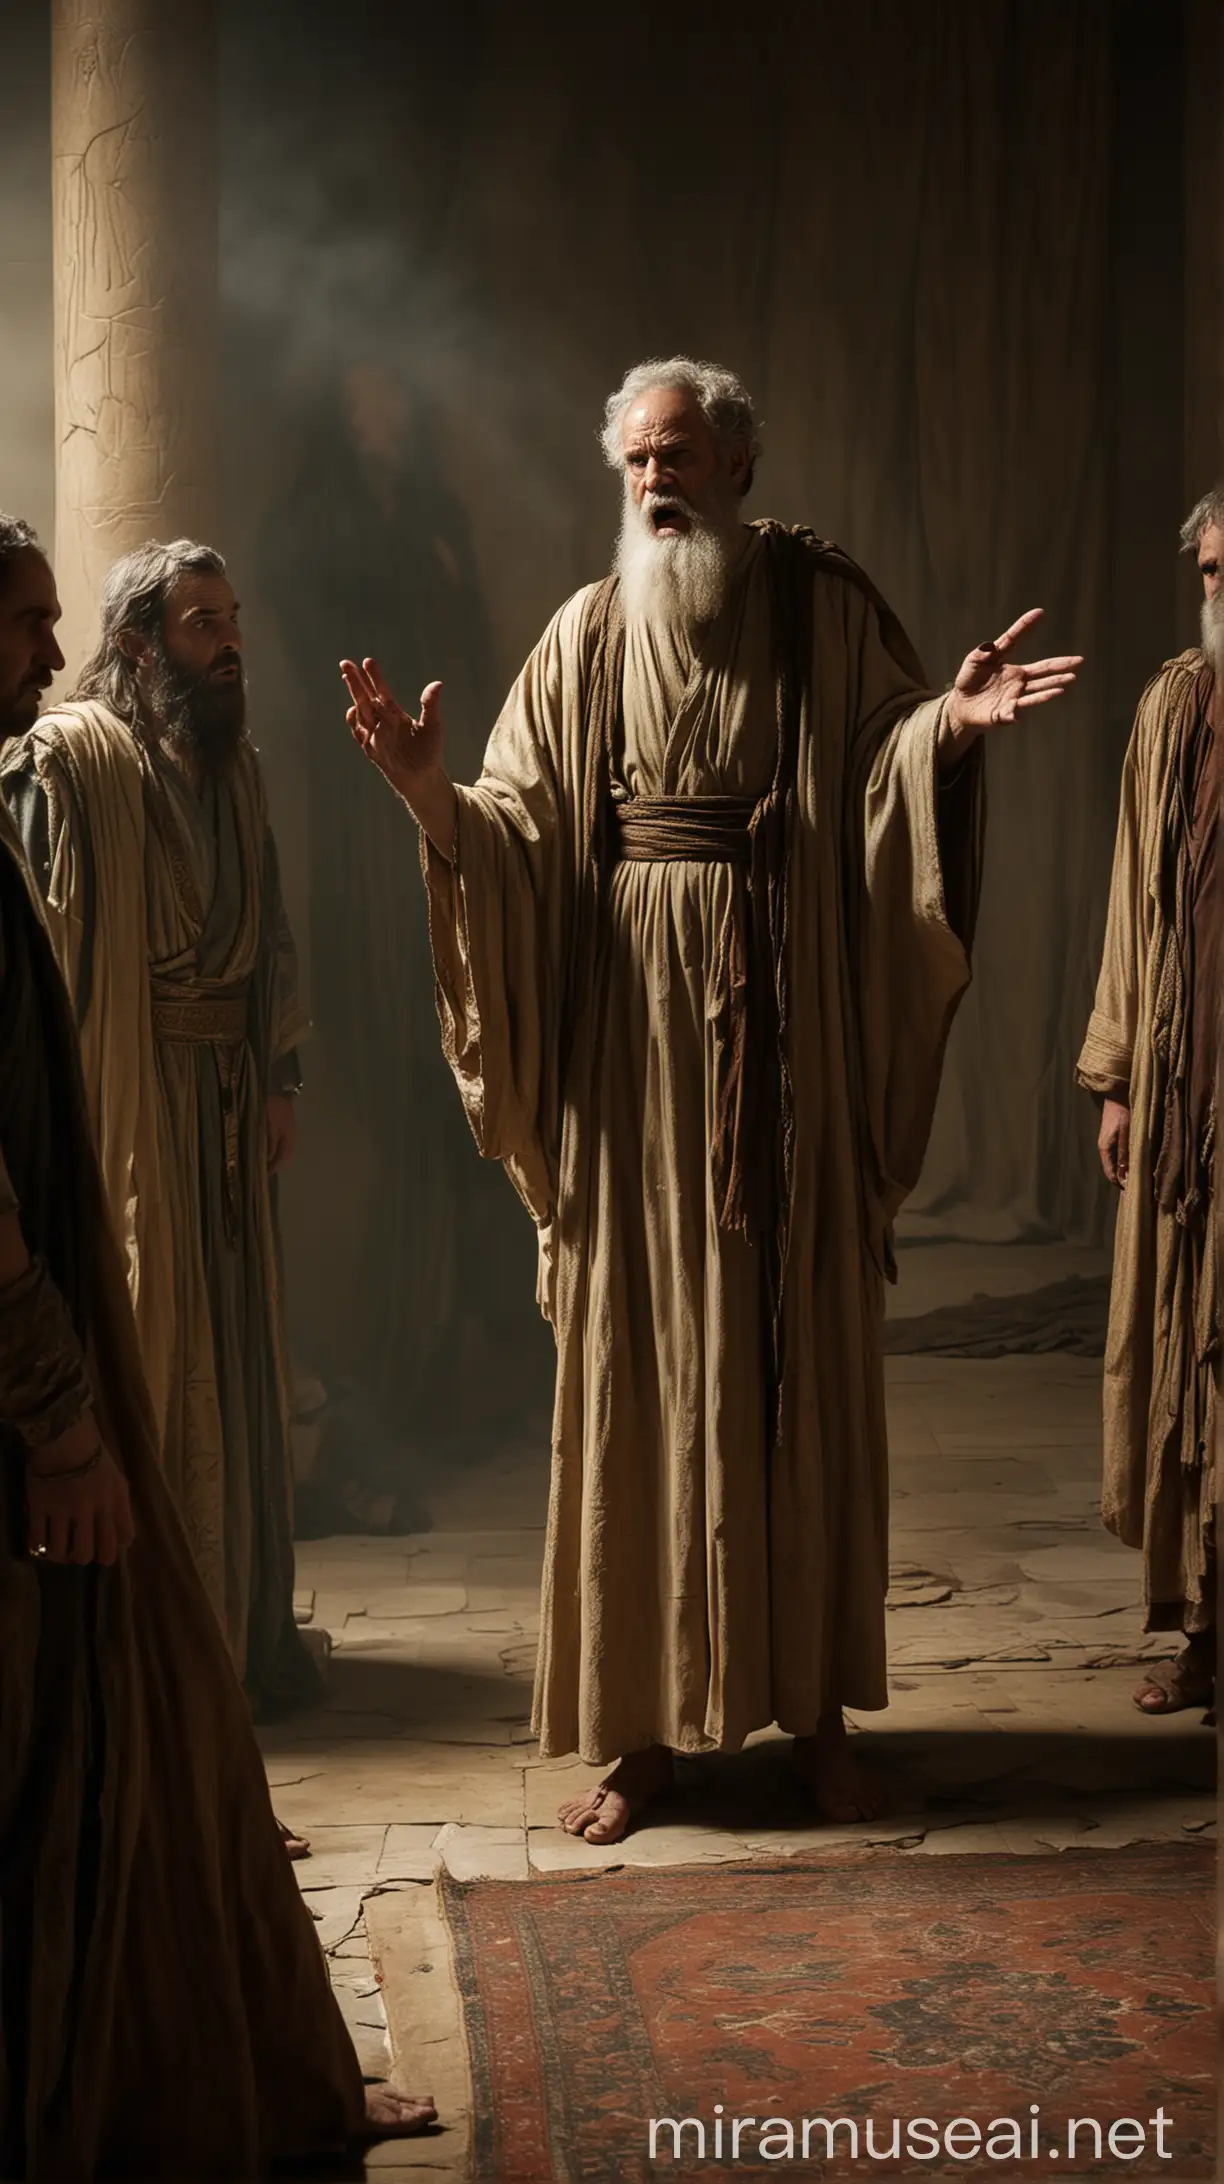 Prophet Jeremiah Confronts Angry Officials in Dimly Lit Room